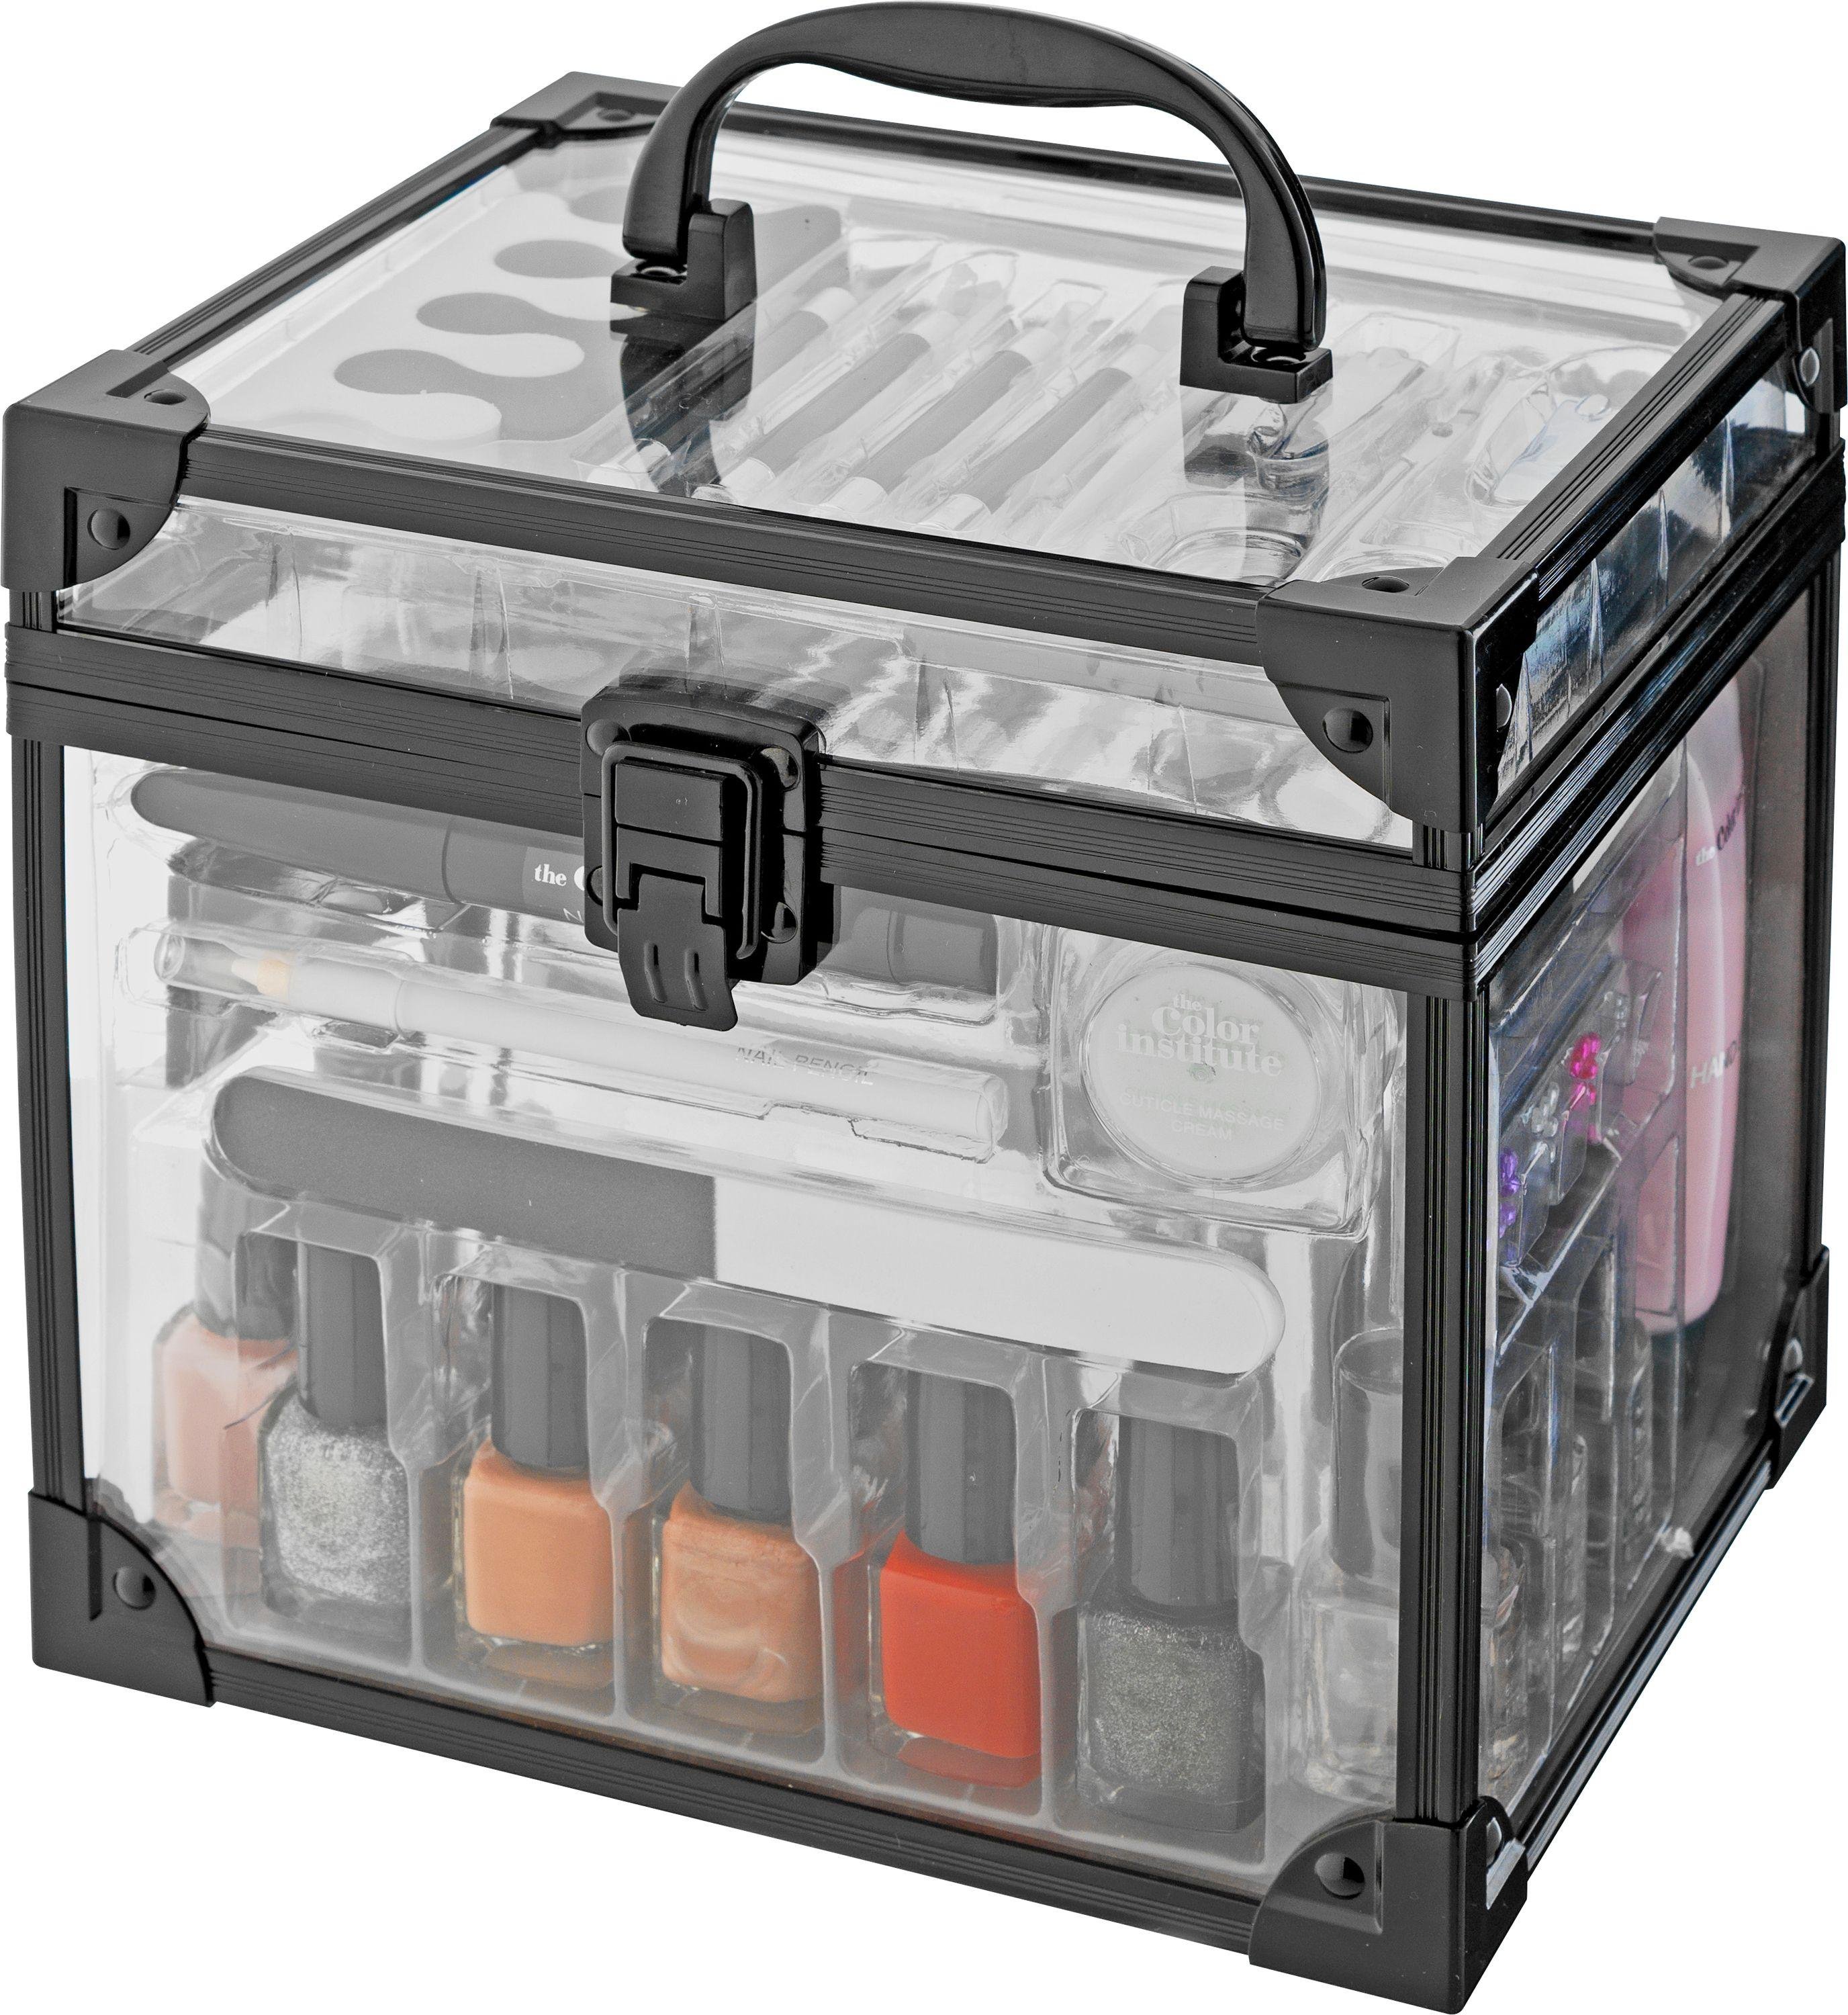 The Color Institute Even More Clearly Nail Set and Case